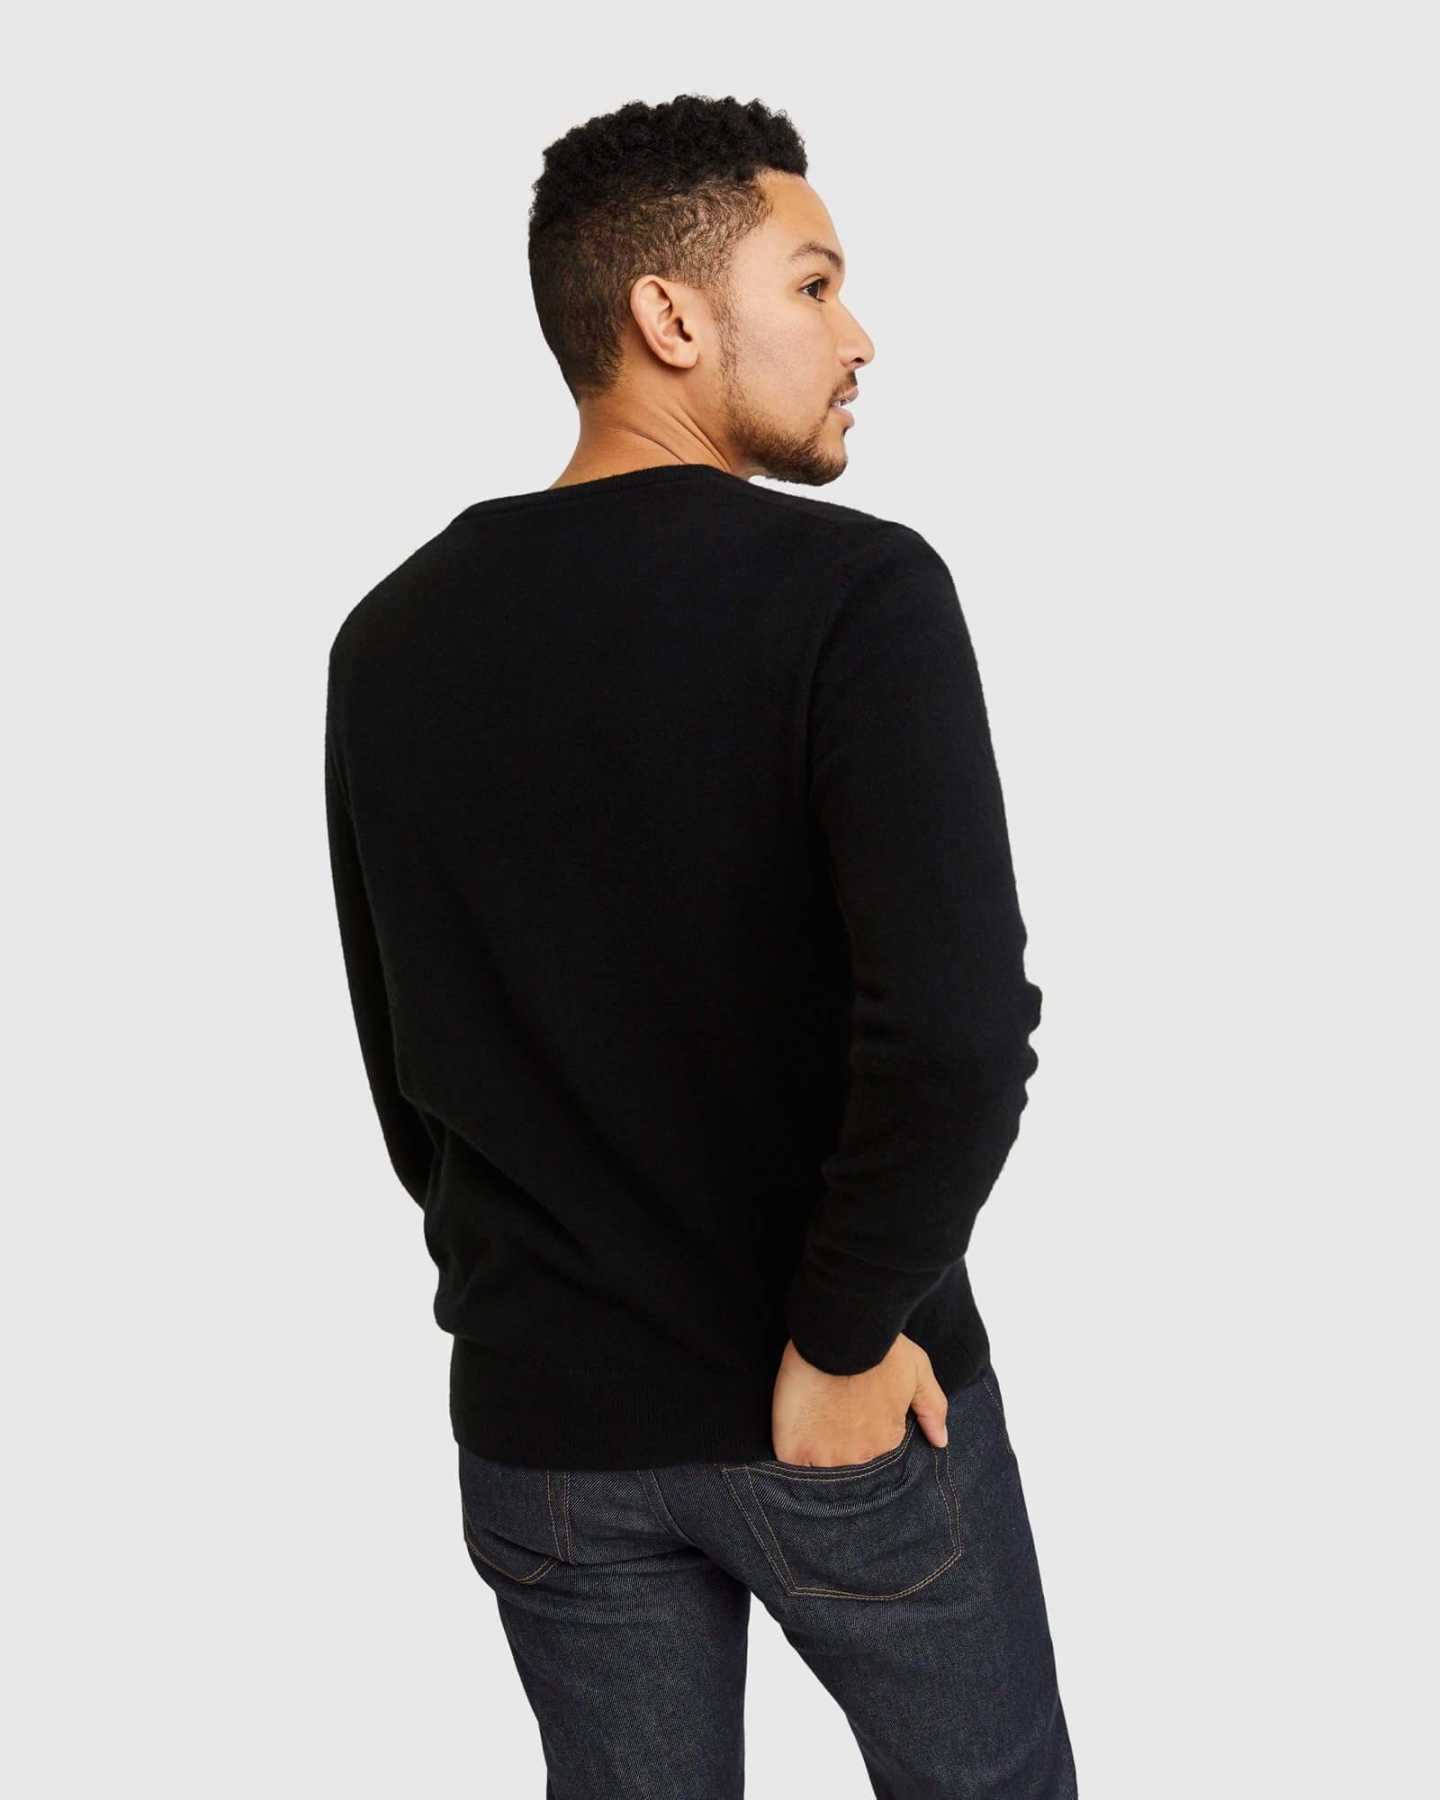 Man wearing black cashmere v-neck sweater for men from behind